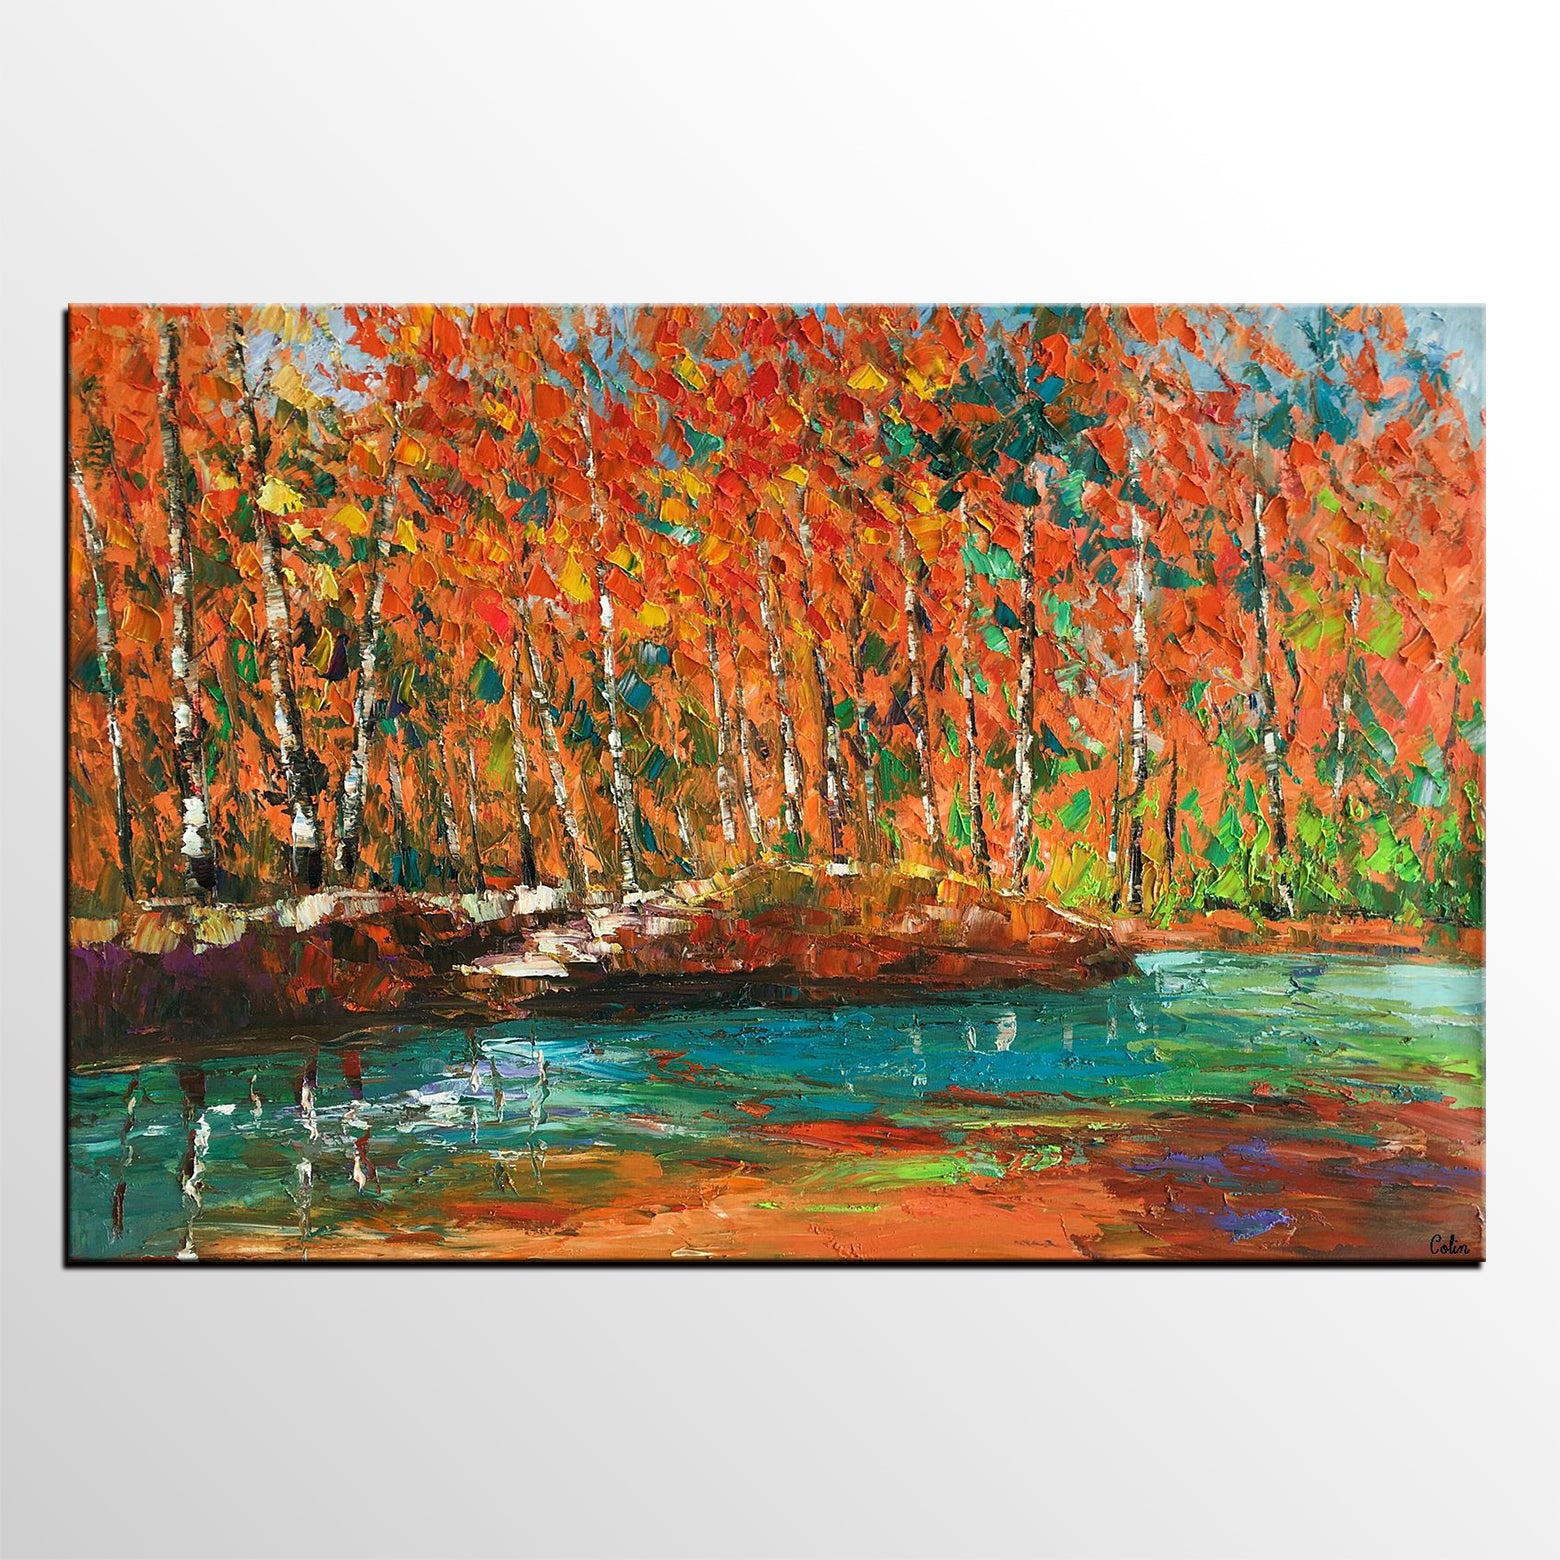 Great BIG Canvas | Lake Scenic With Autumn Trees Reflected In Water,  Cumbria, England Canvas Wall Art - 16x24